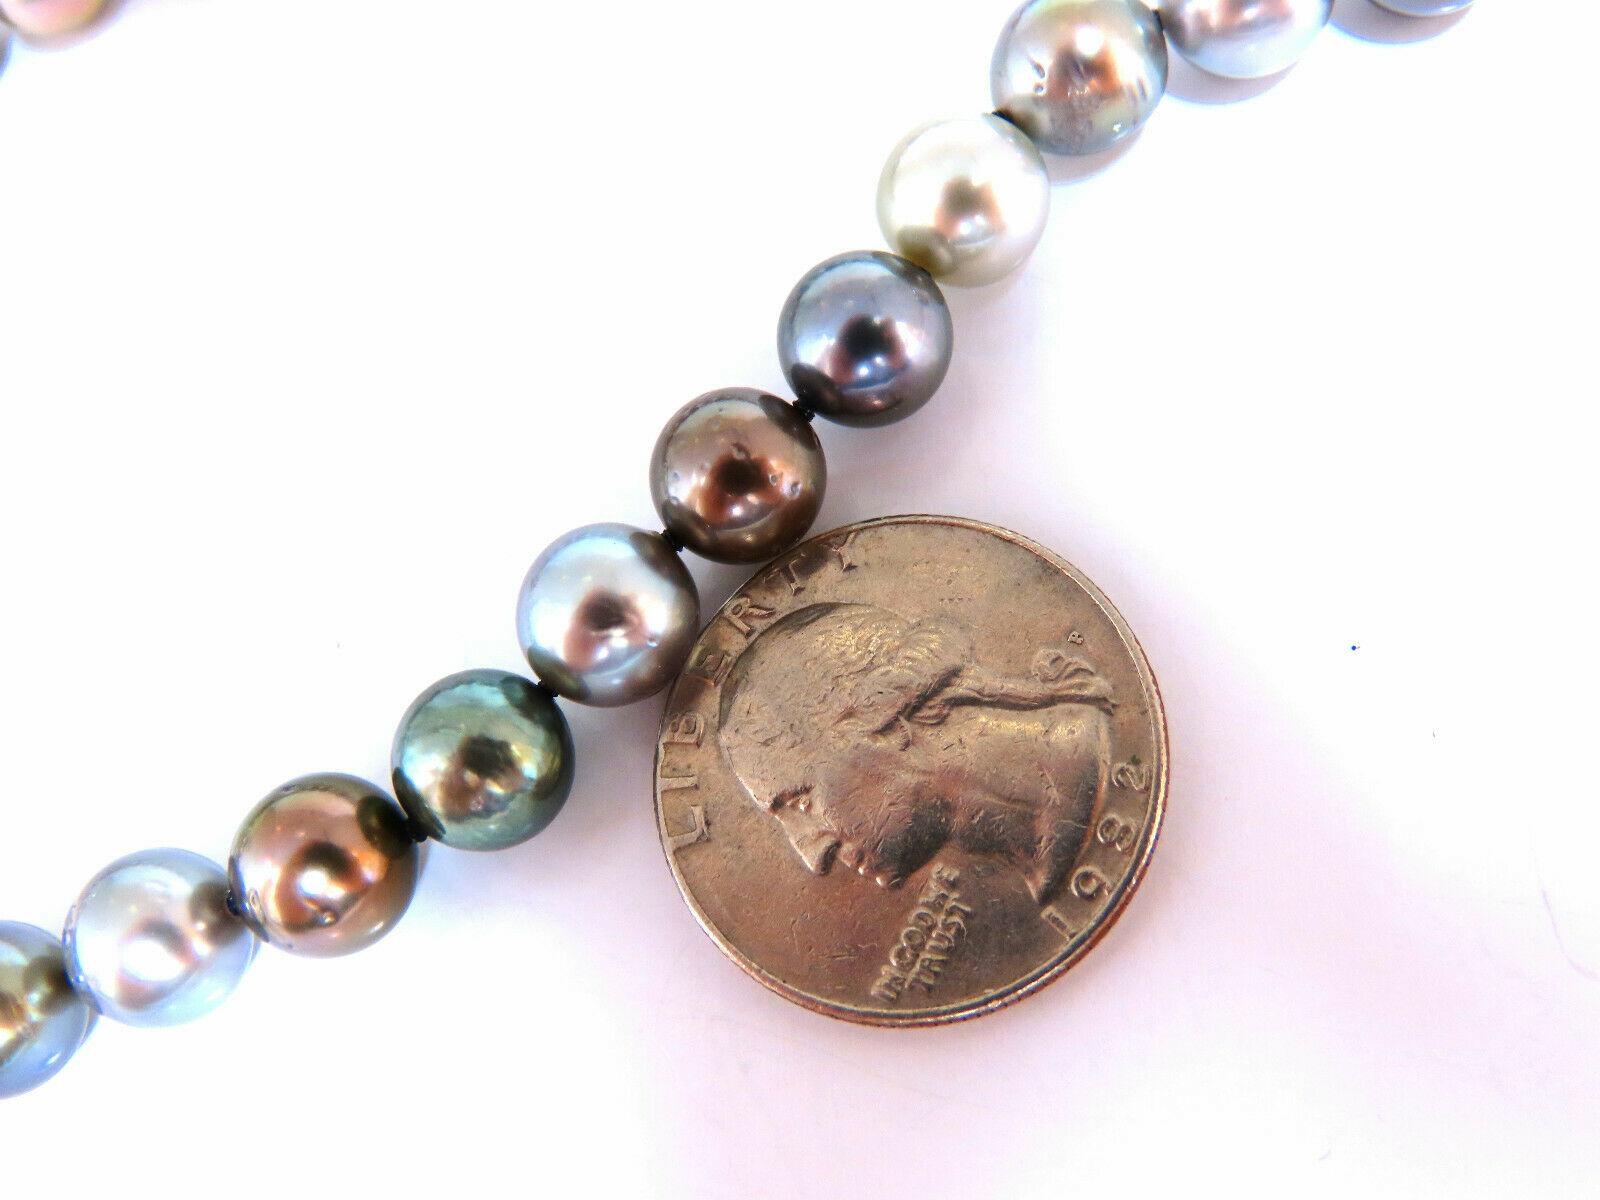 natural saltwater pearl necklace